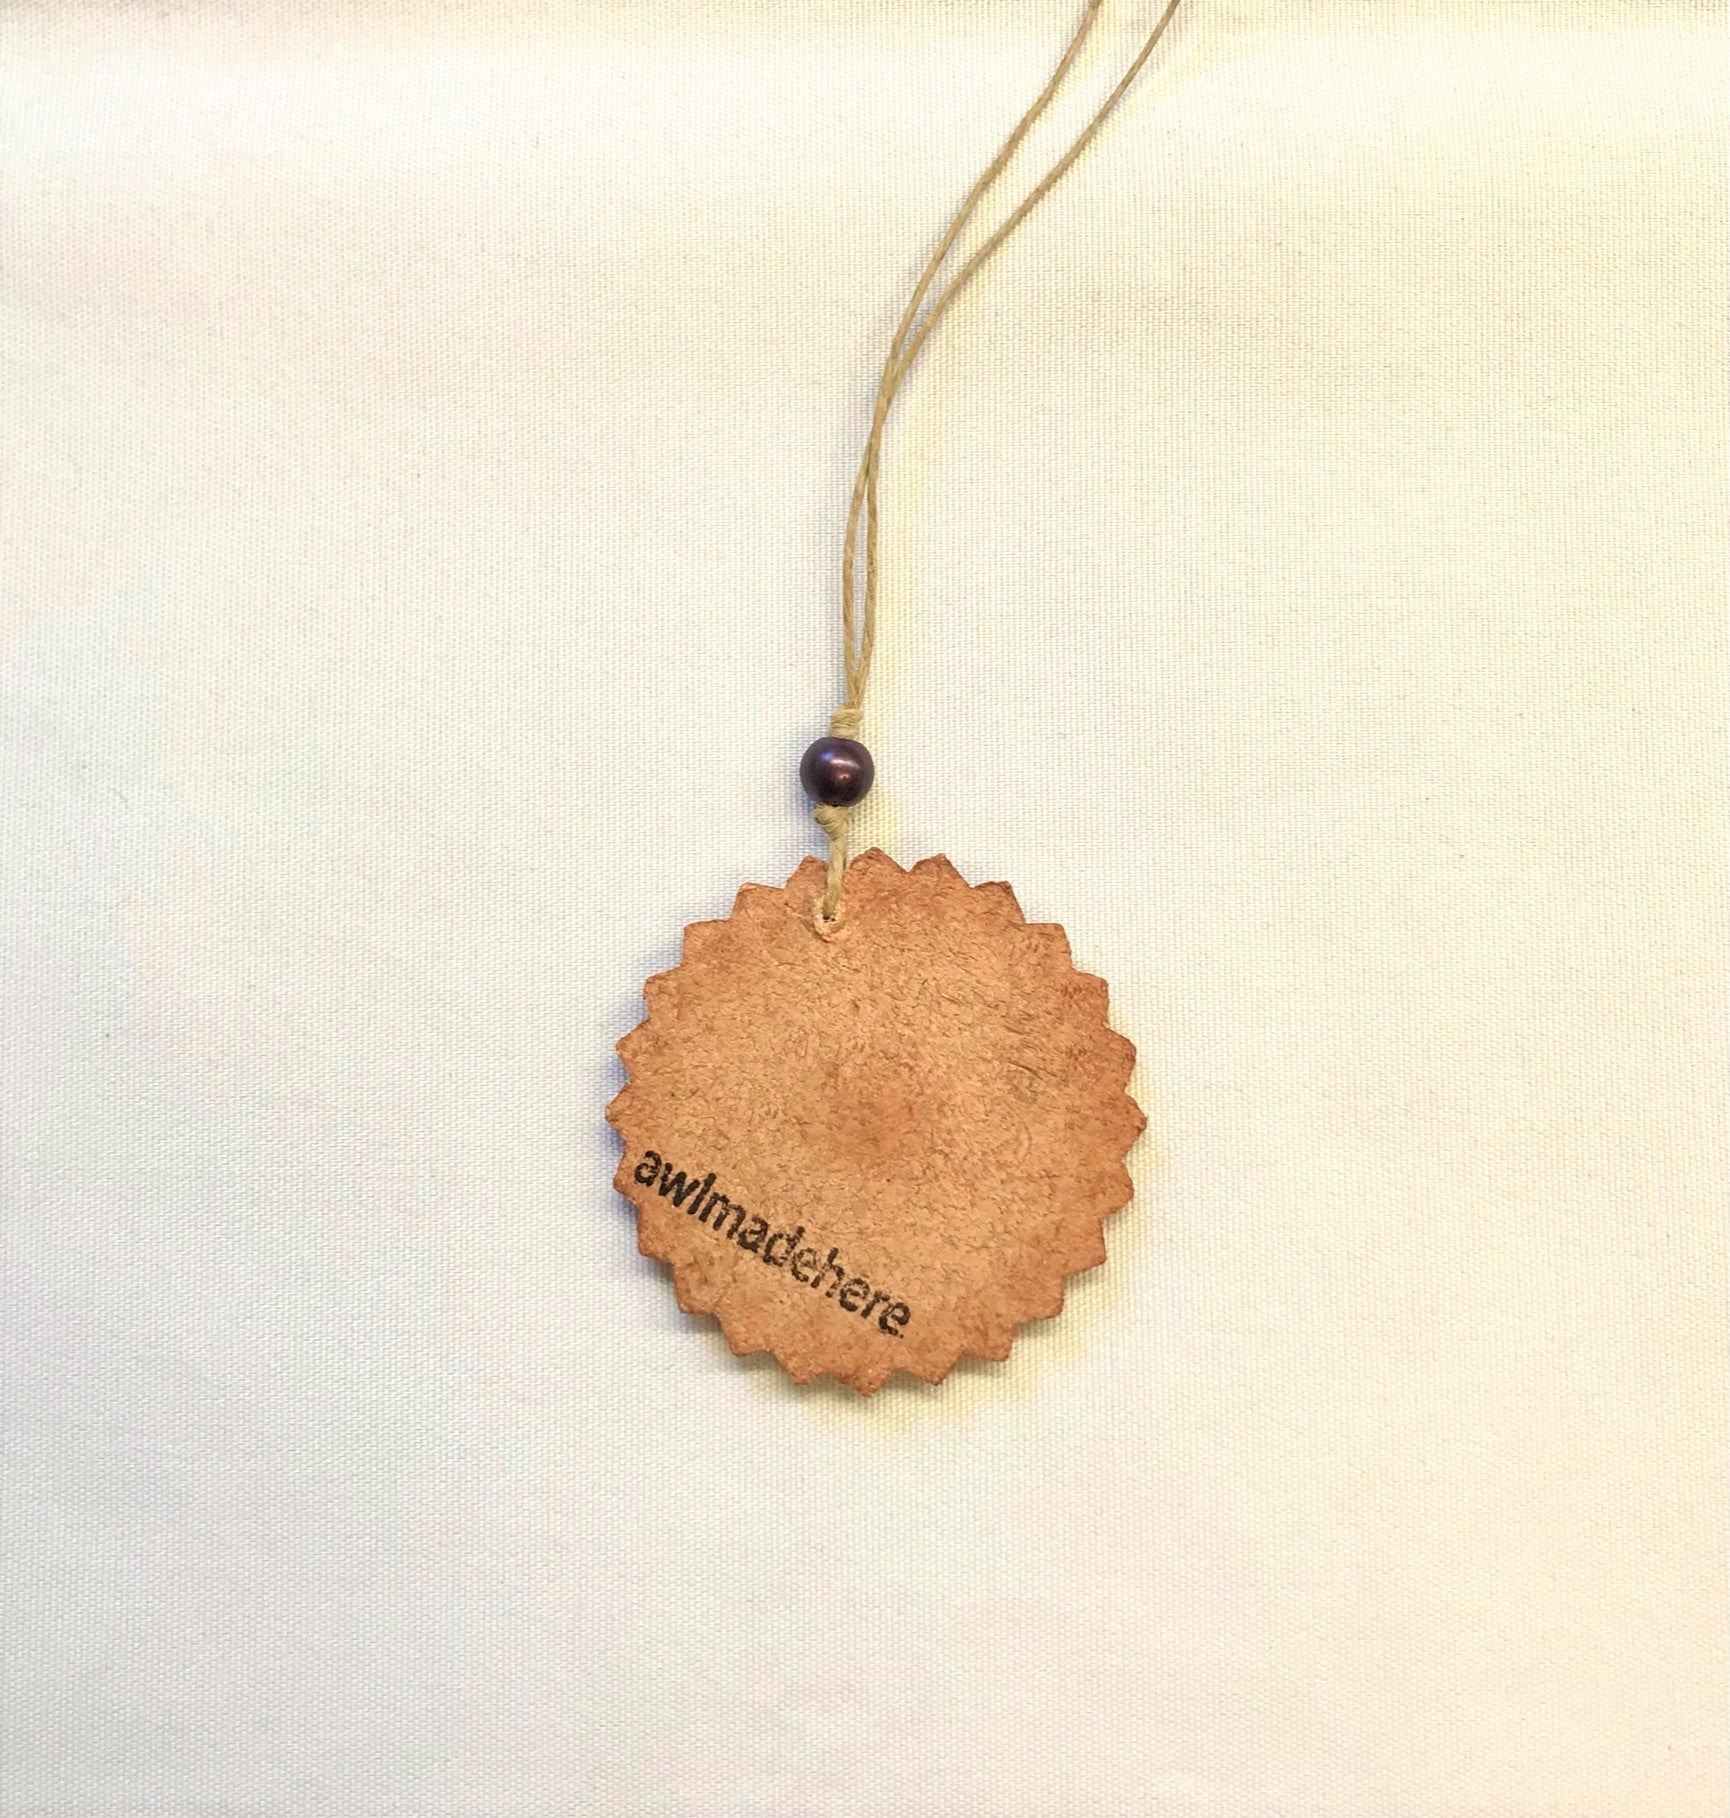 Small Leather Ornaments, Personalized